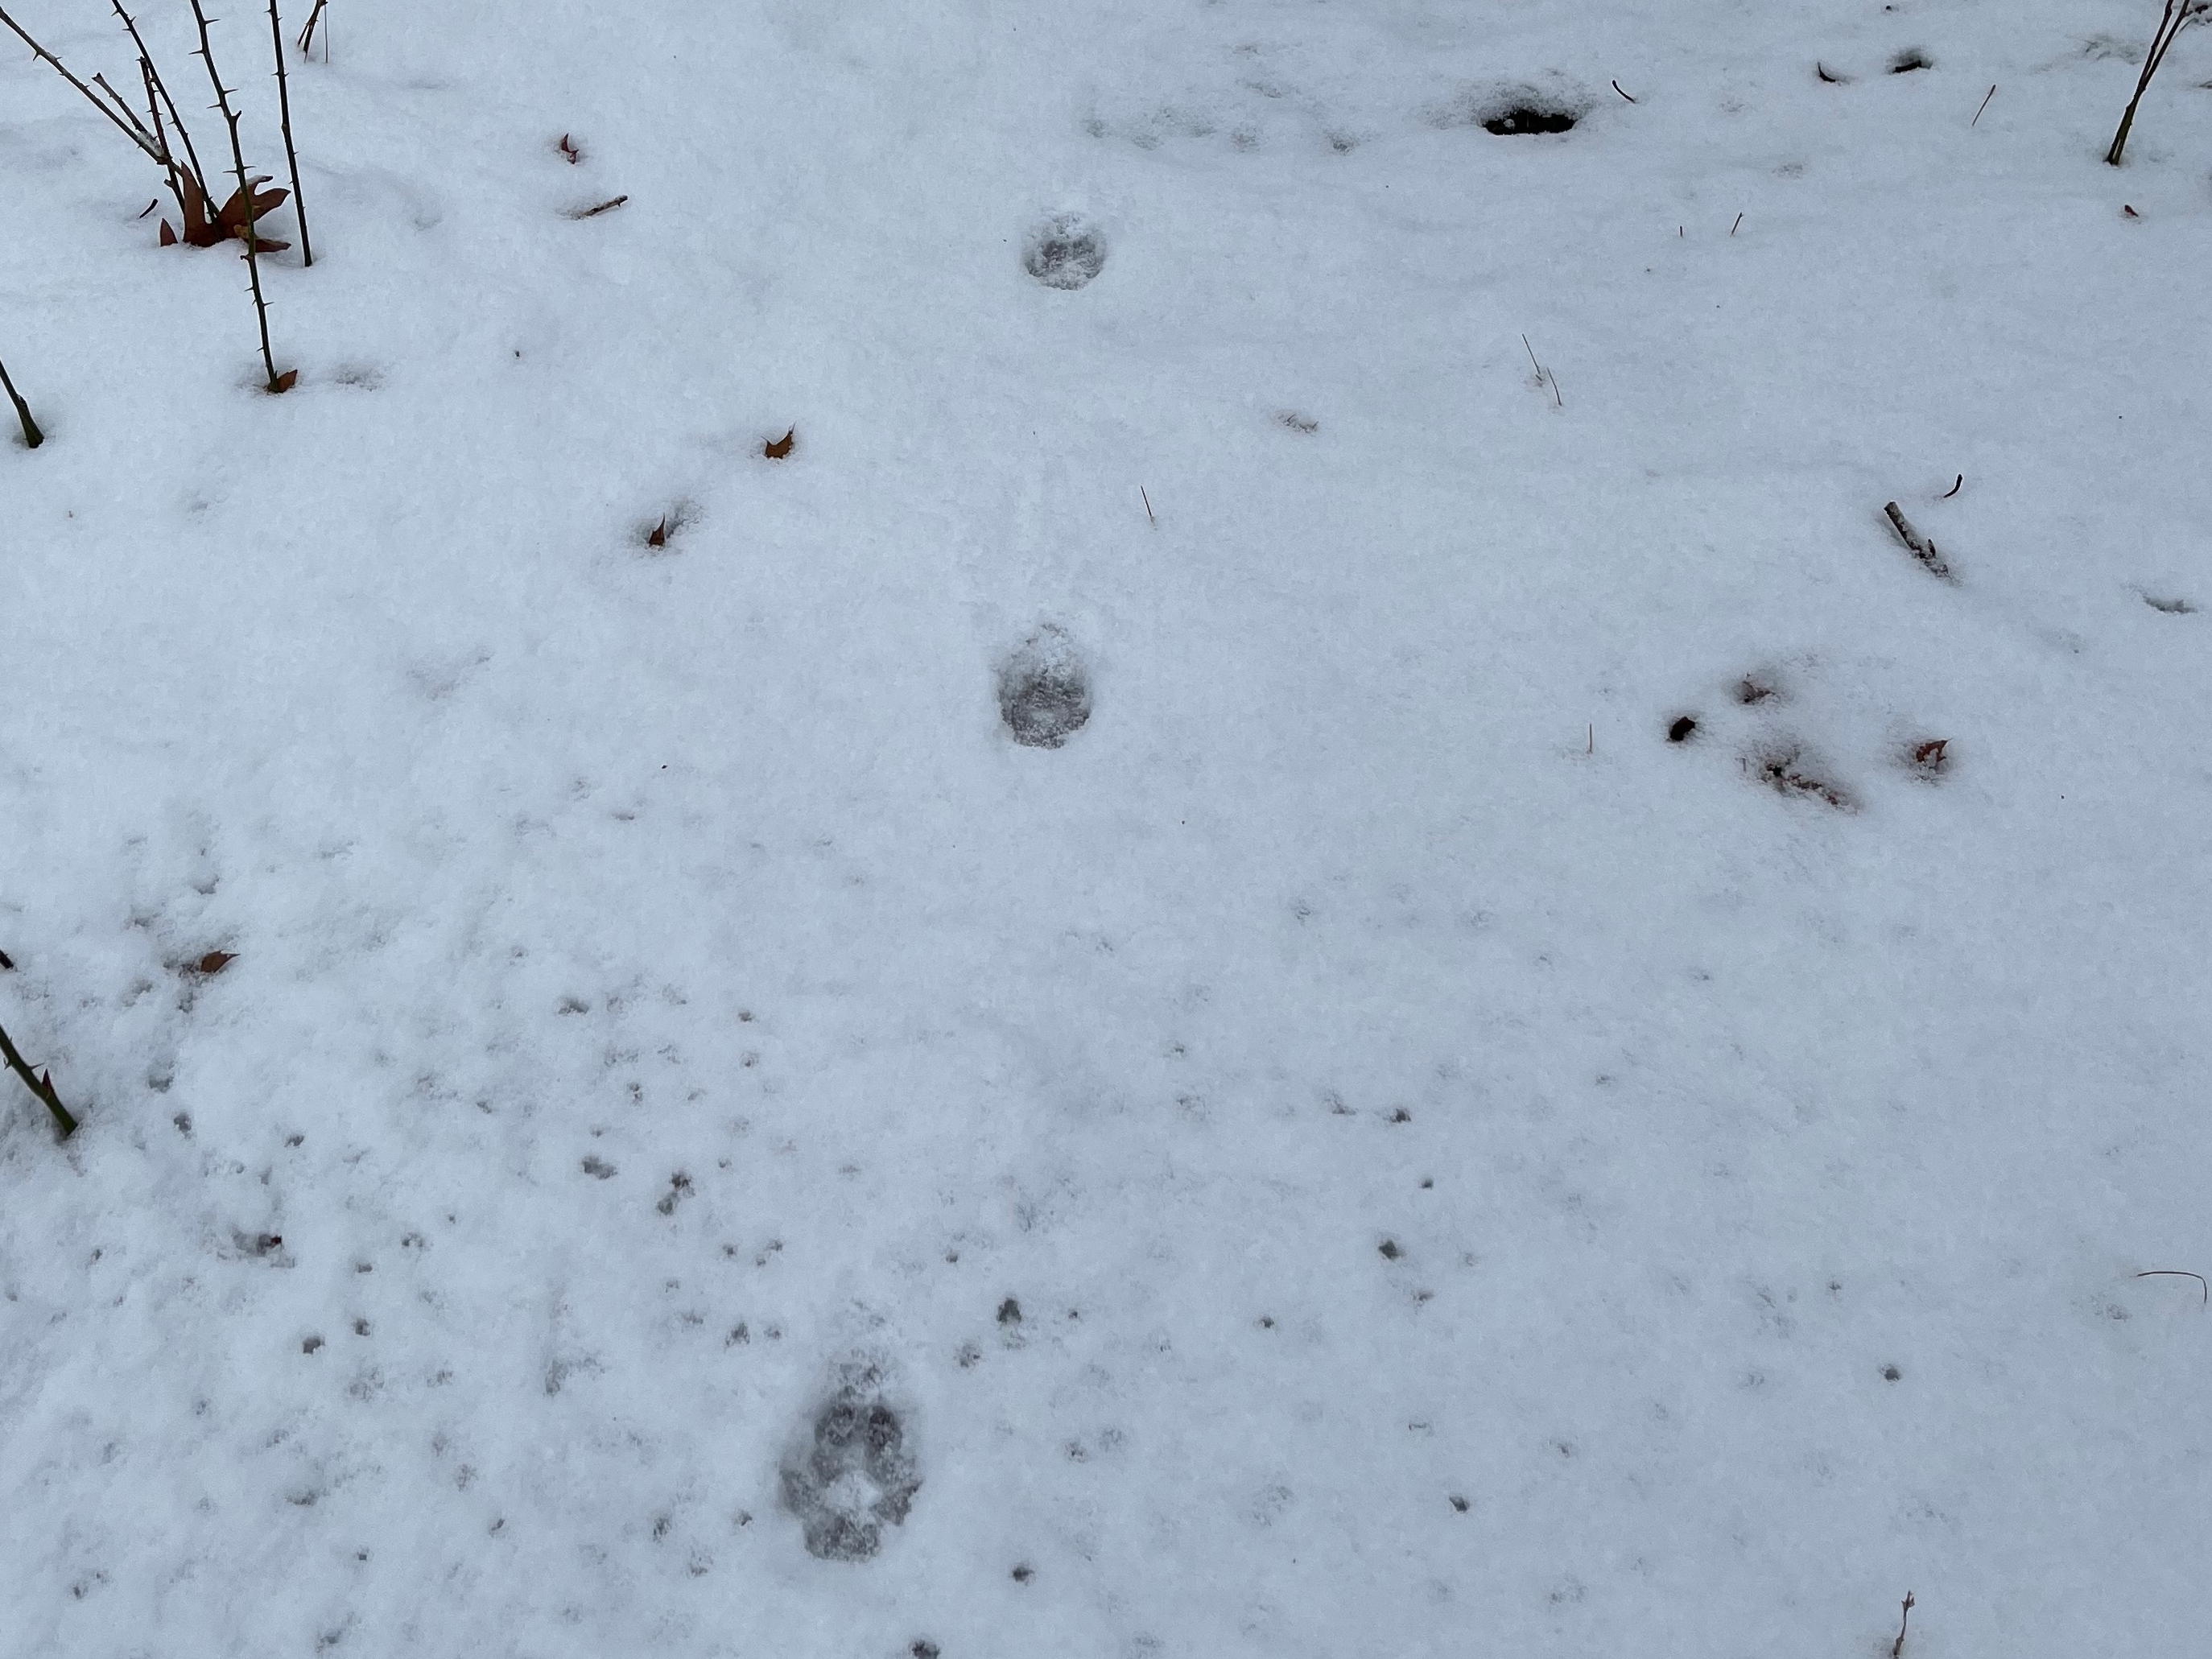 Animals leave clues in the winter woods - The Boston Globe